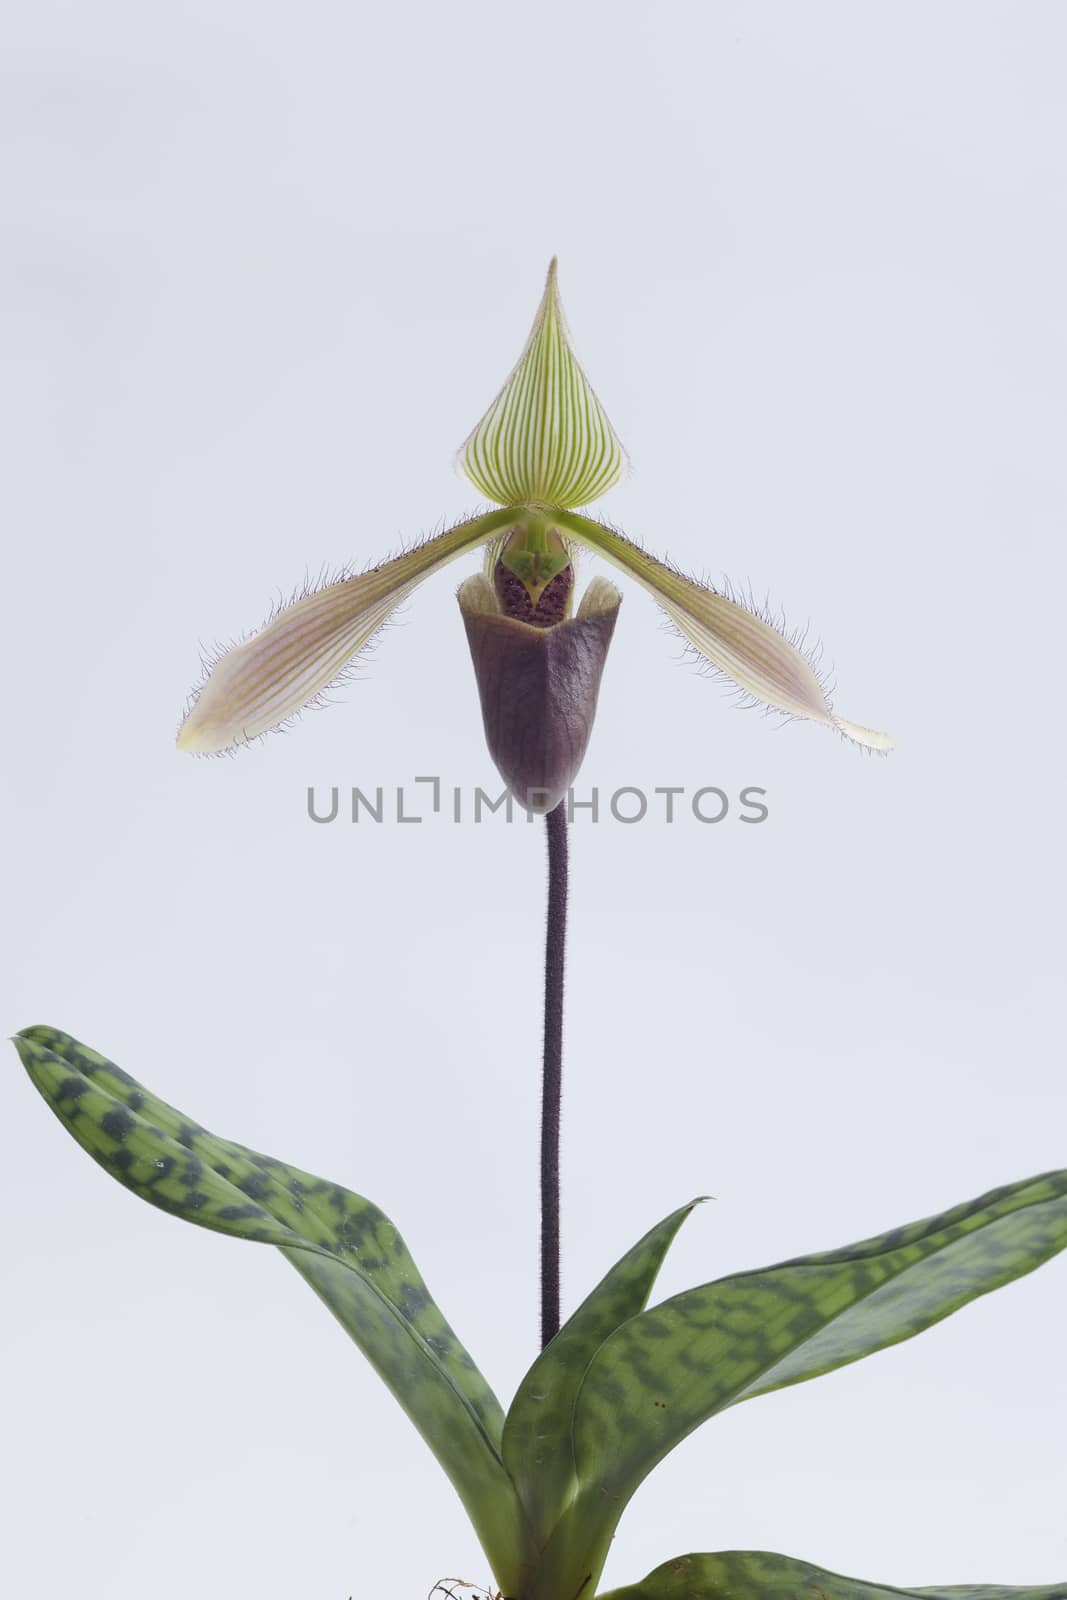 Paphiopedilum, often called the Venus slipper, is a genus of the Lady slipper orchid subfamily Cypripedioideae of the flowering plant family Orchidaceae